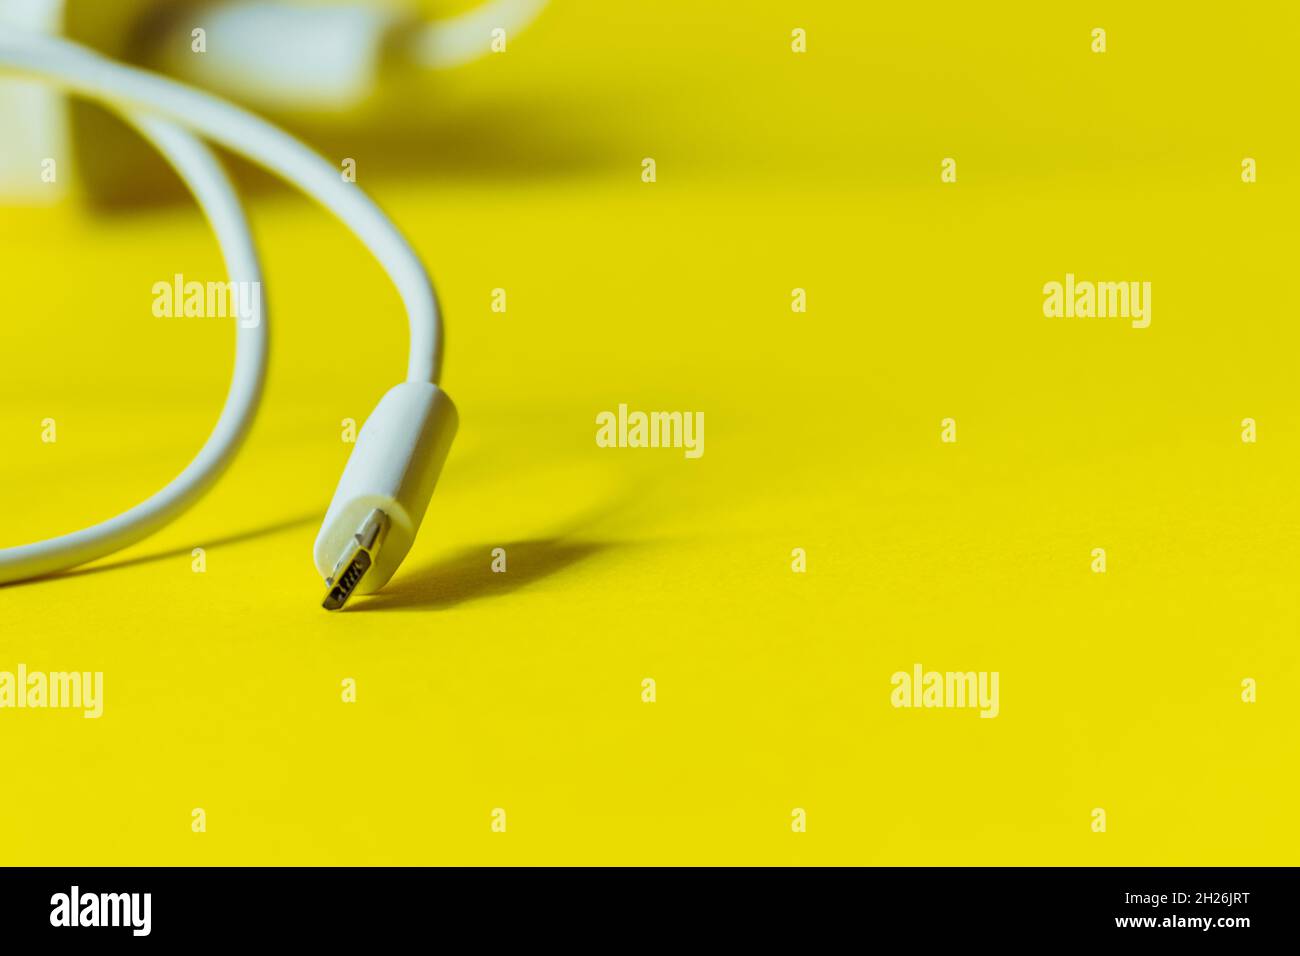 White cable with micro usb plug on a yellow background.  Stock Photo